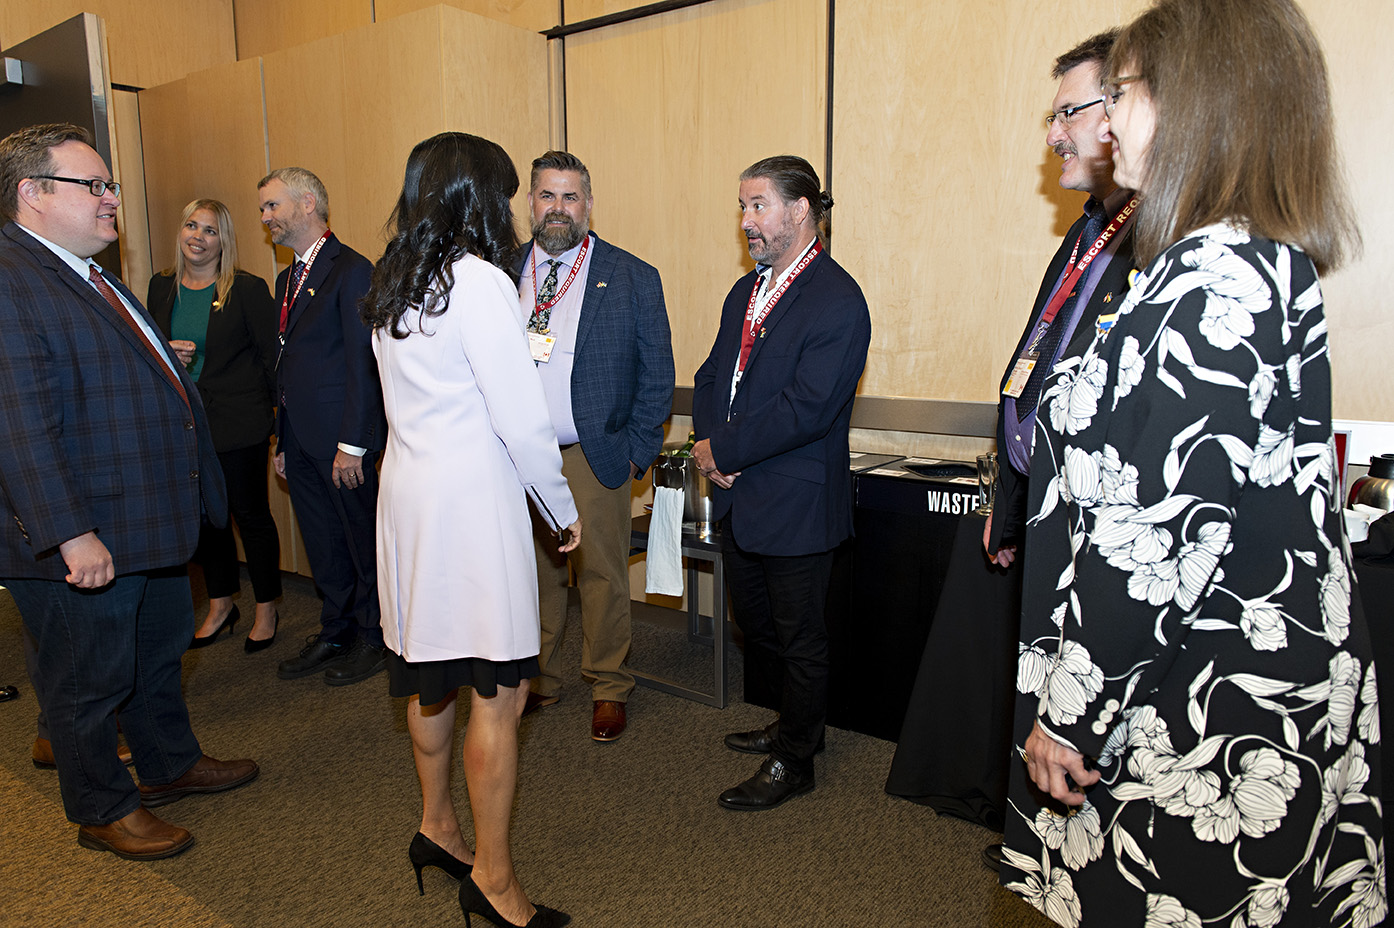 CEO Len Anderson in conversation with Minister of National Defense, Anita Anand, and other event participants.